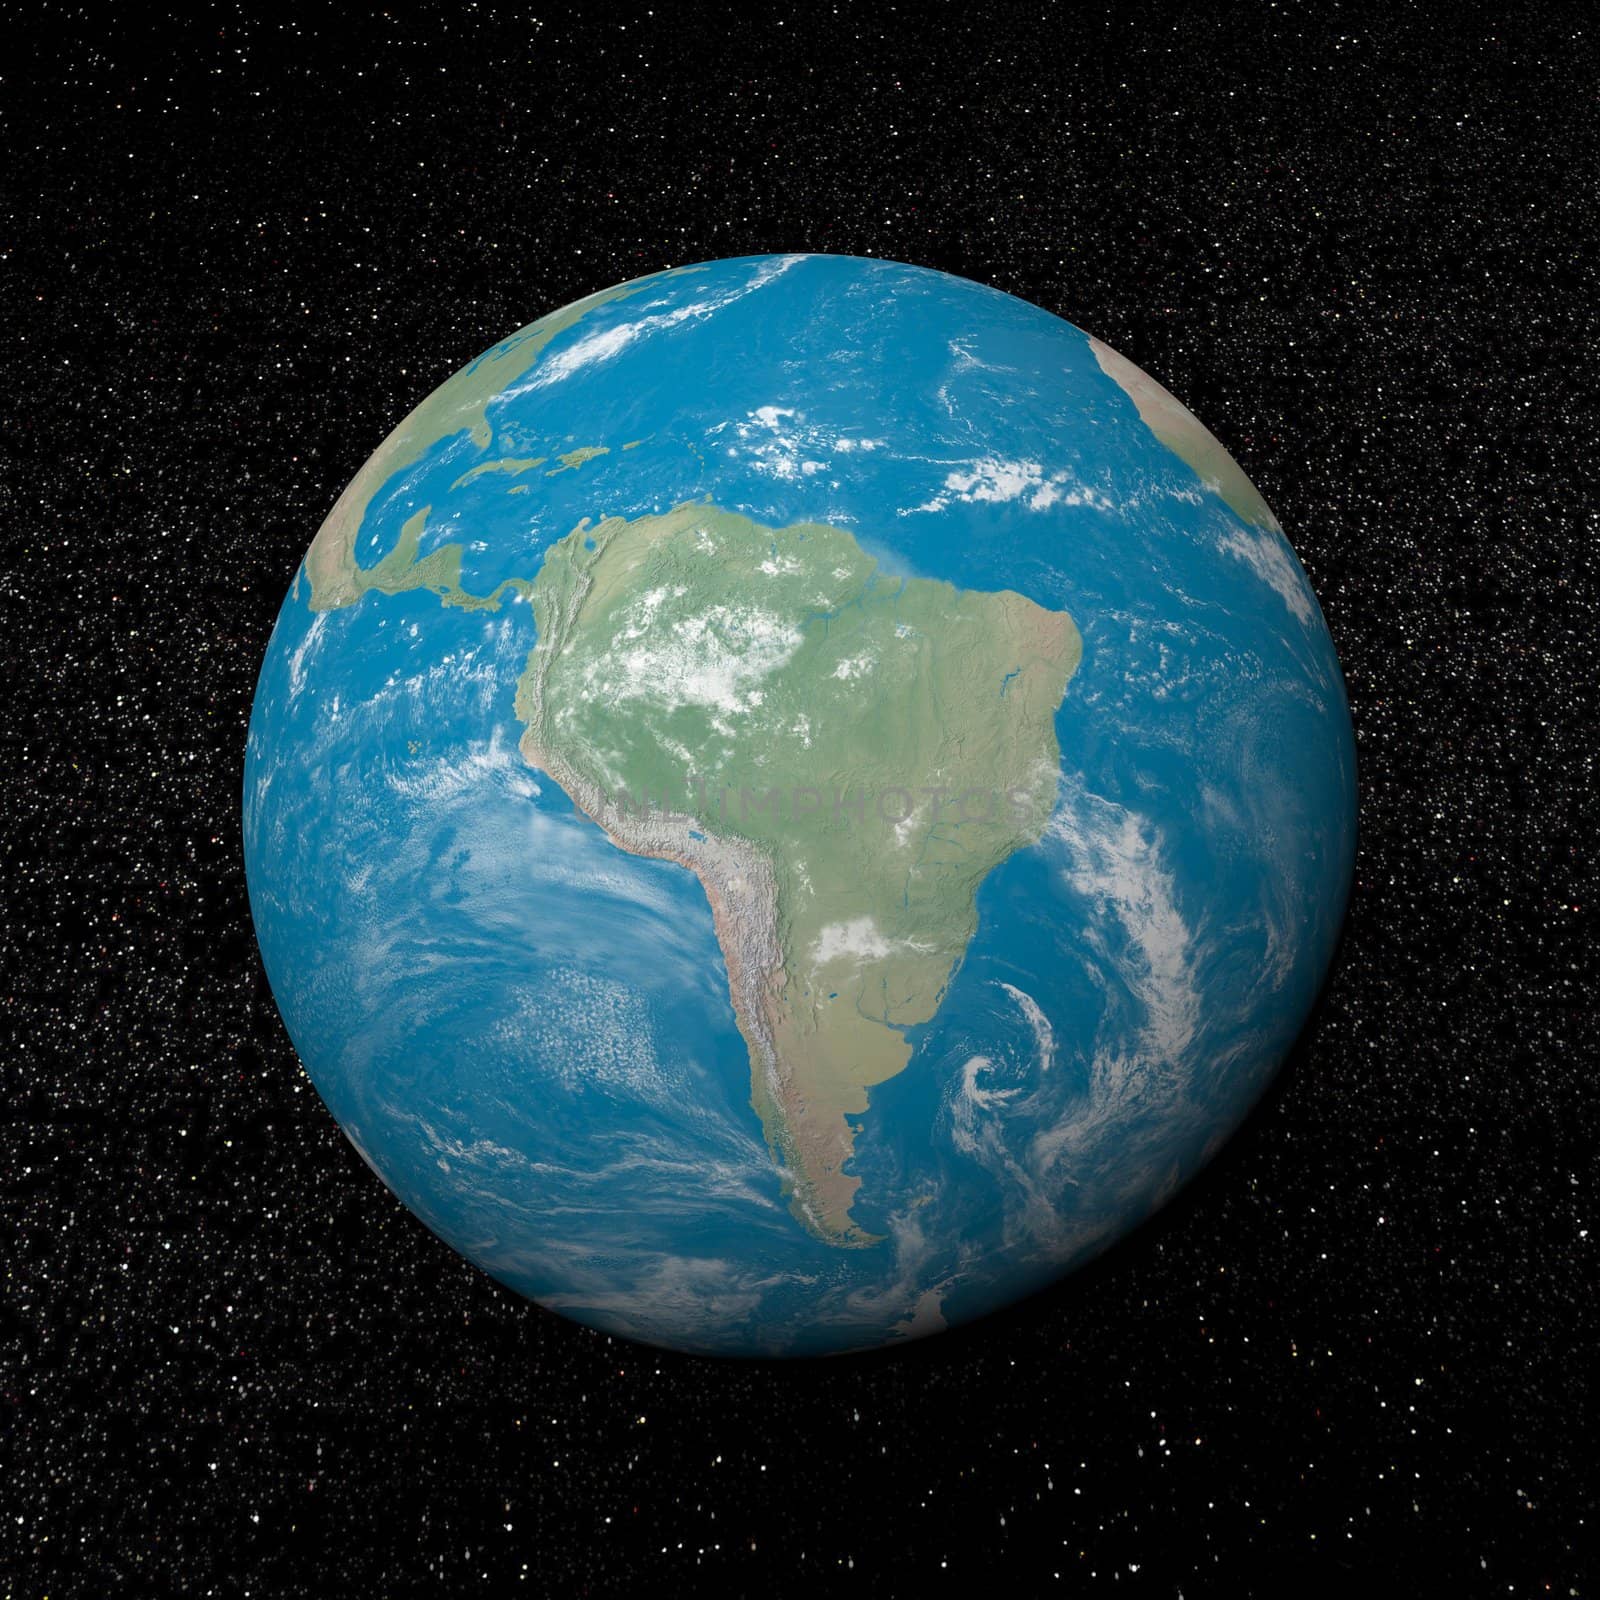 South america on earth - 3D render by Elenaphotos21